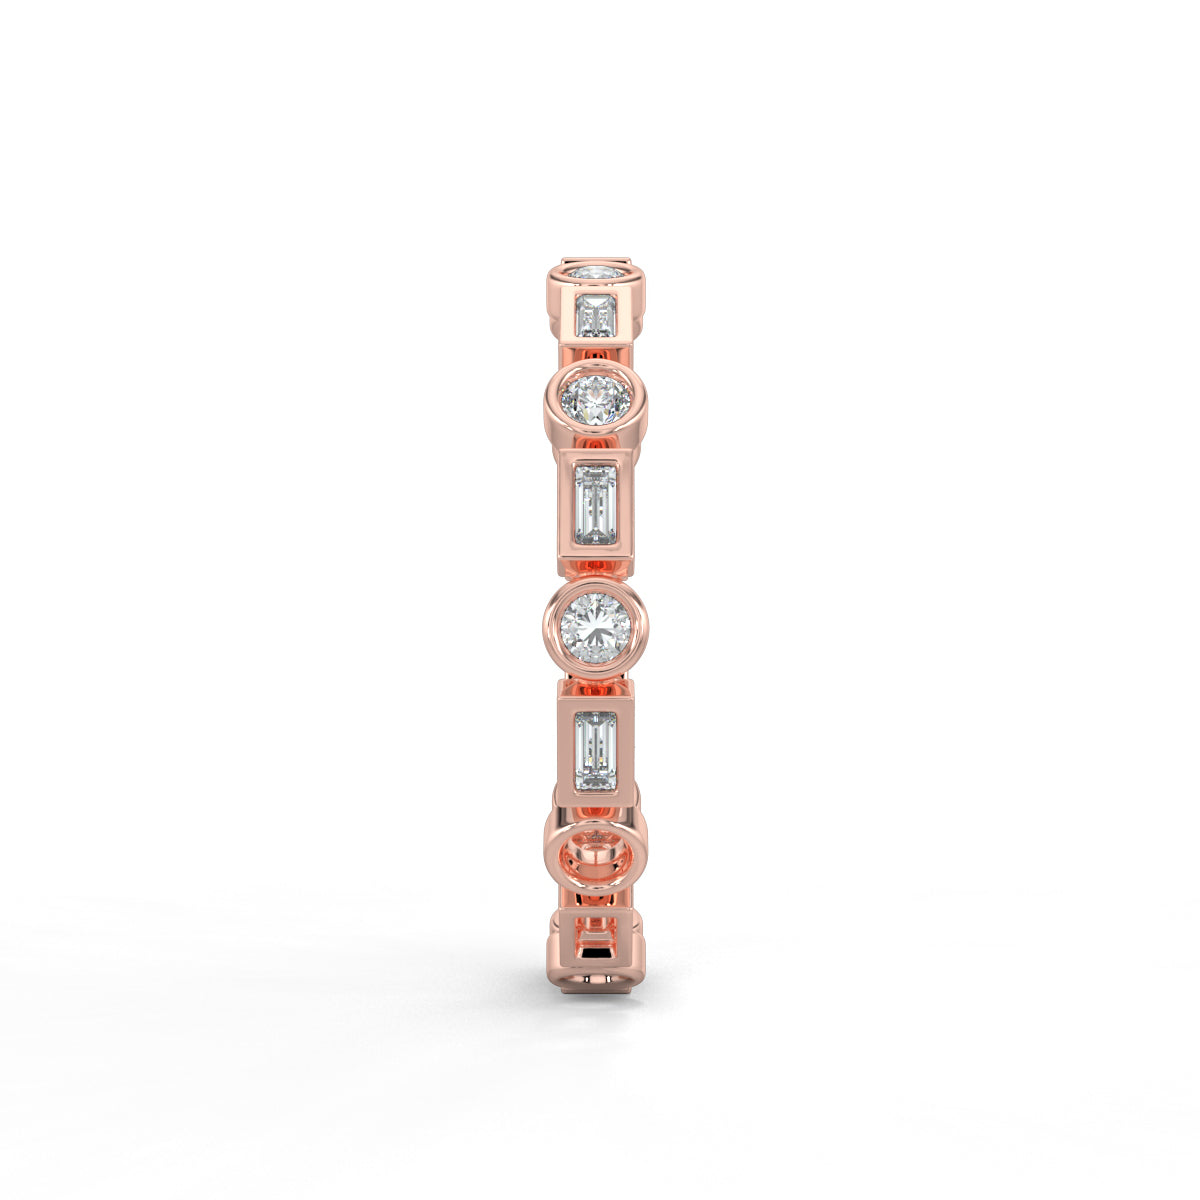 Rose Gold, Diamond Ring, natural diamond eternity band, Lab-grown diamond eternity band, round diamond, baguette diamond, everyday ring, timeless elegance, sophisticated jewelry